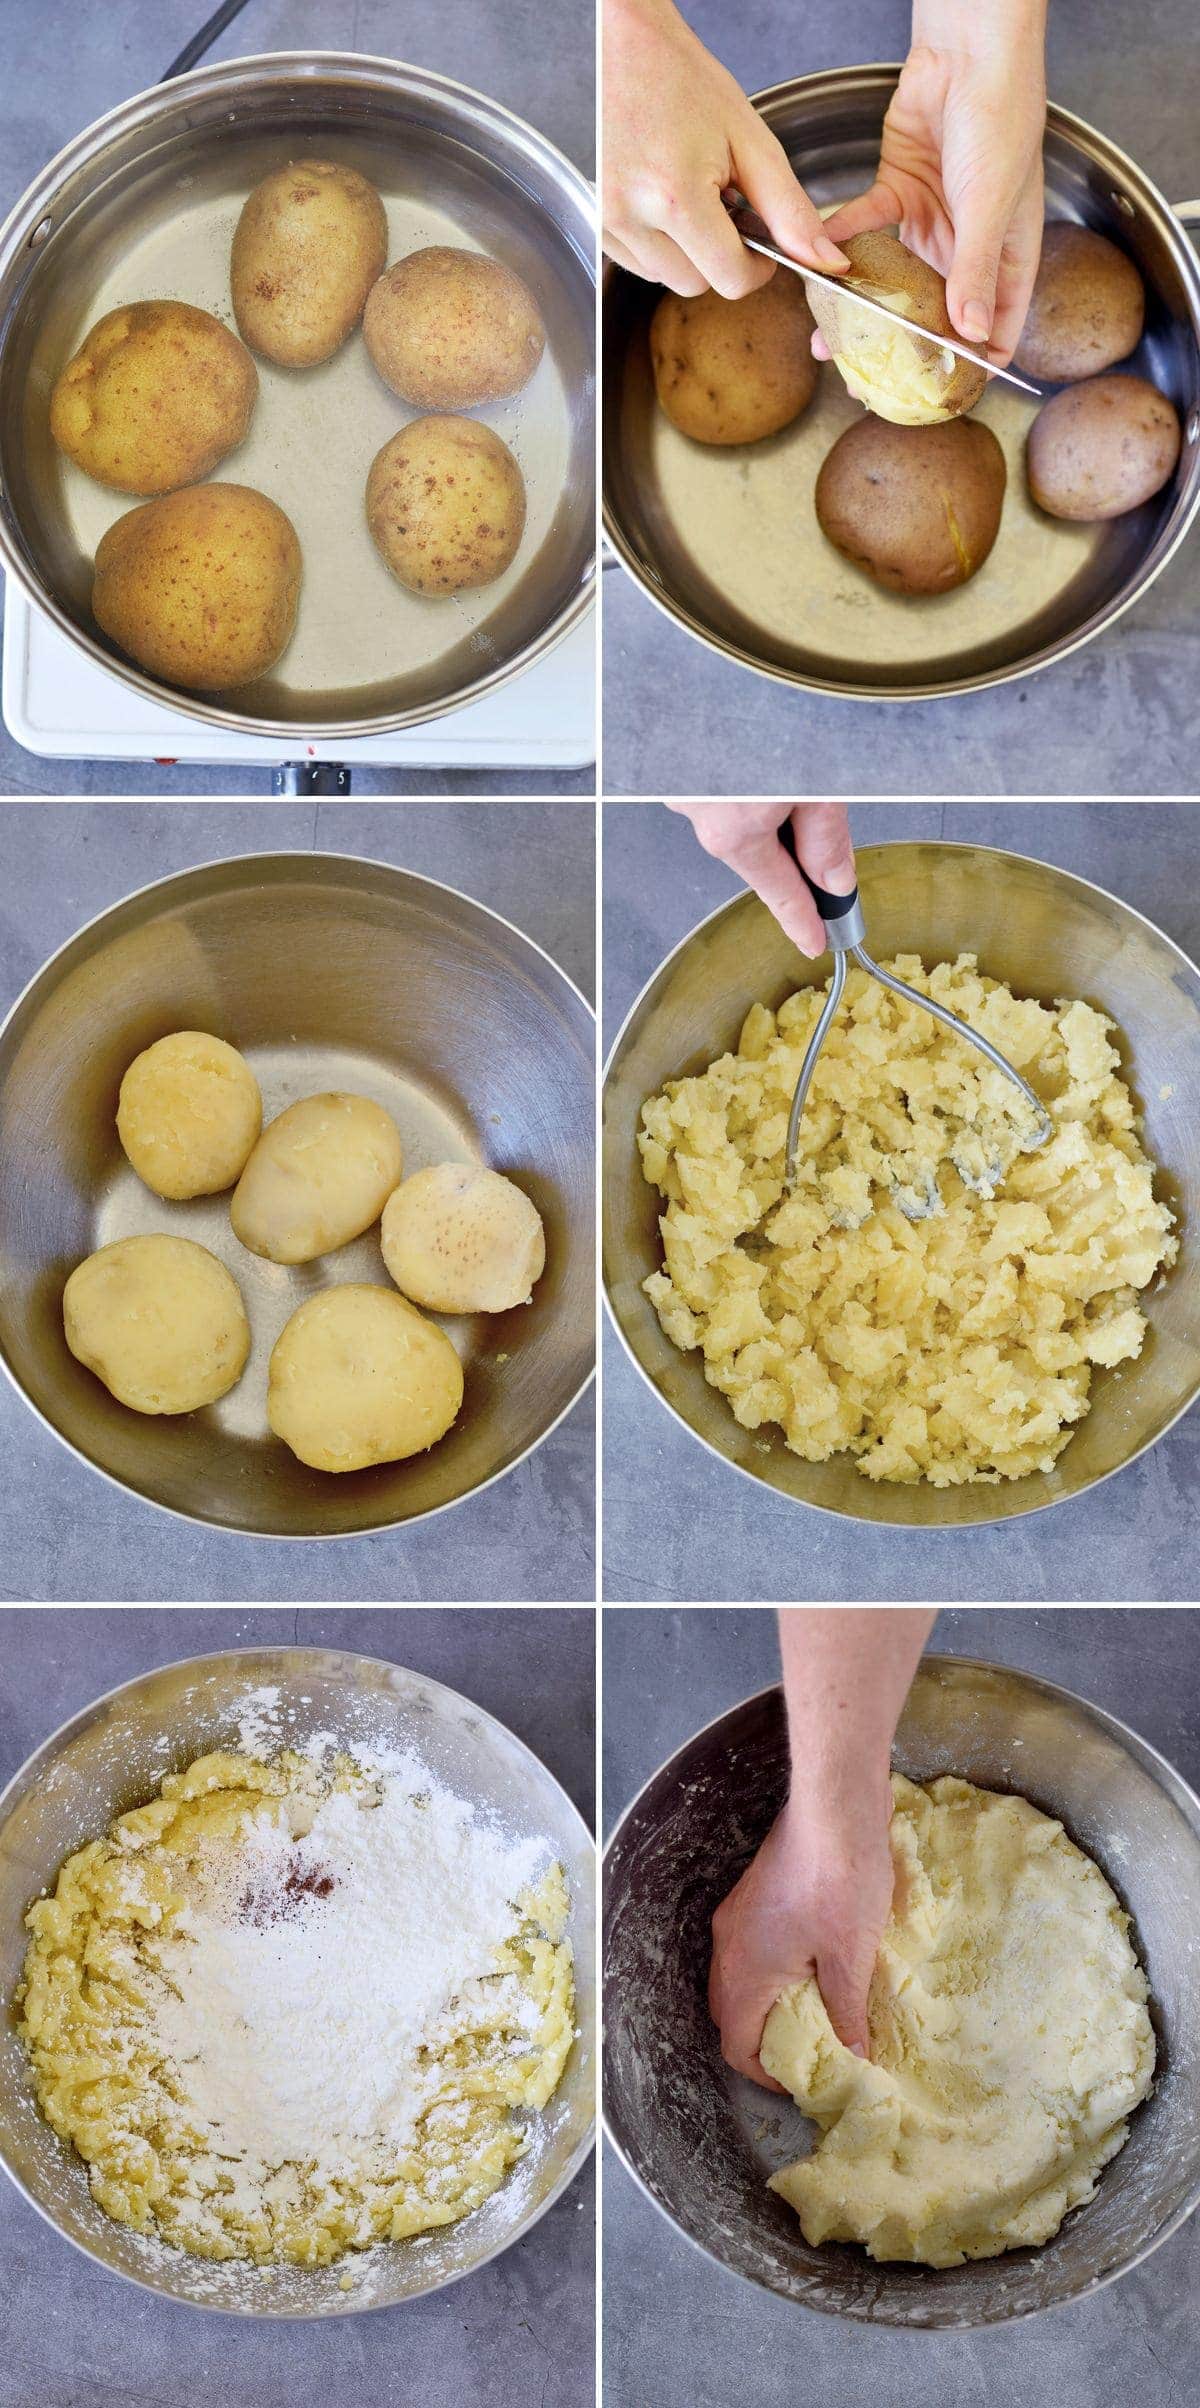 6 step-by-step photos showing how to cook and mash potatoes